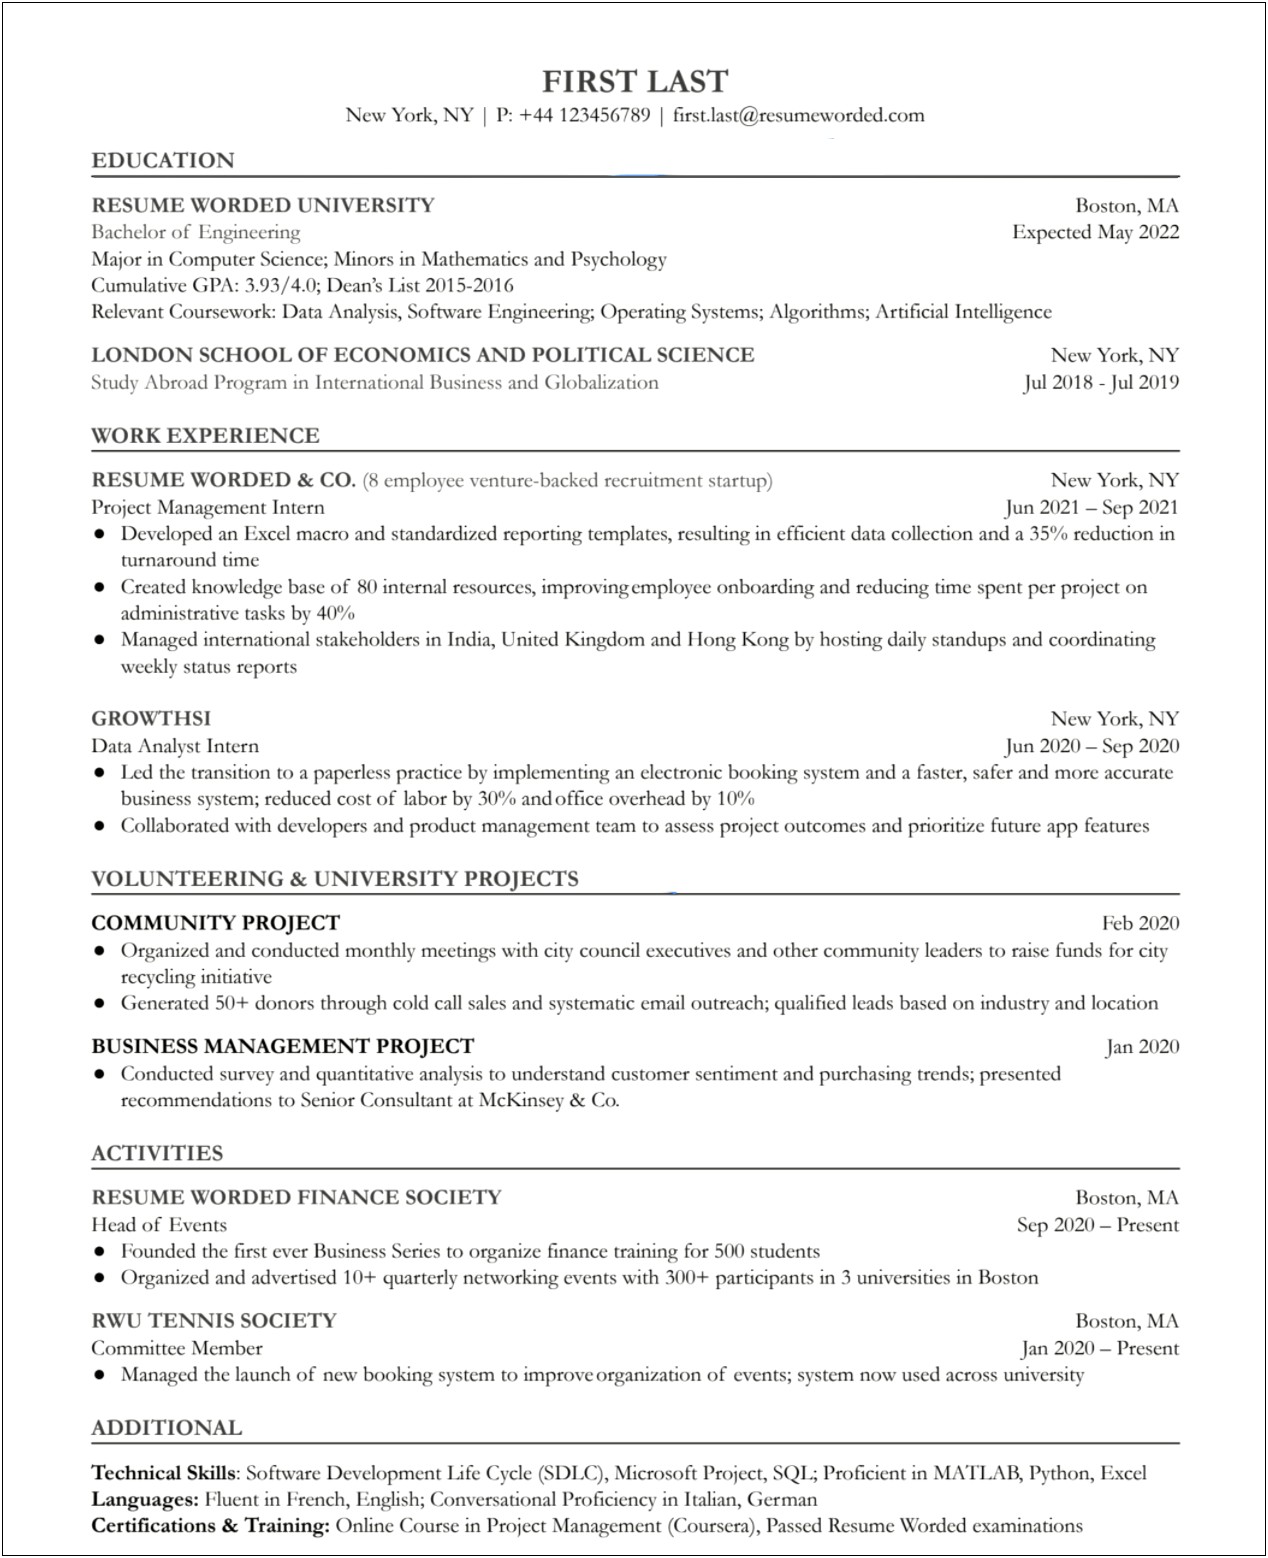 Summary Of Qualifications Entry Level Manager Resume